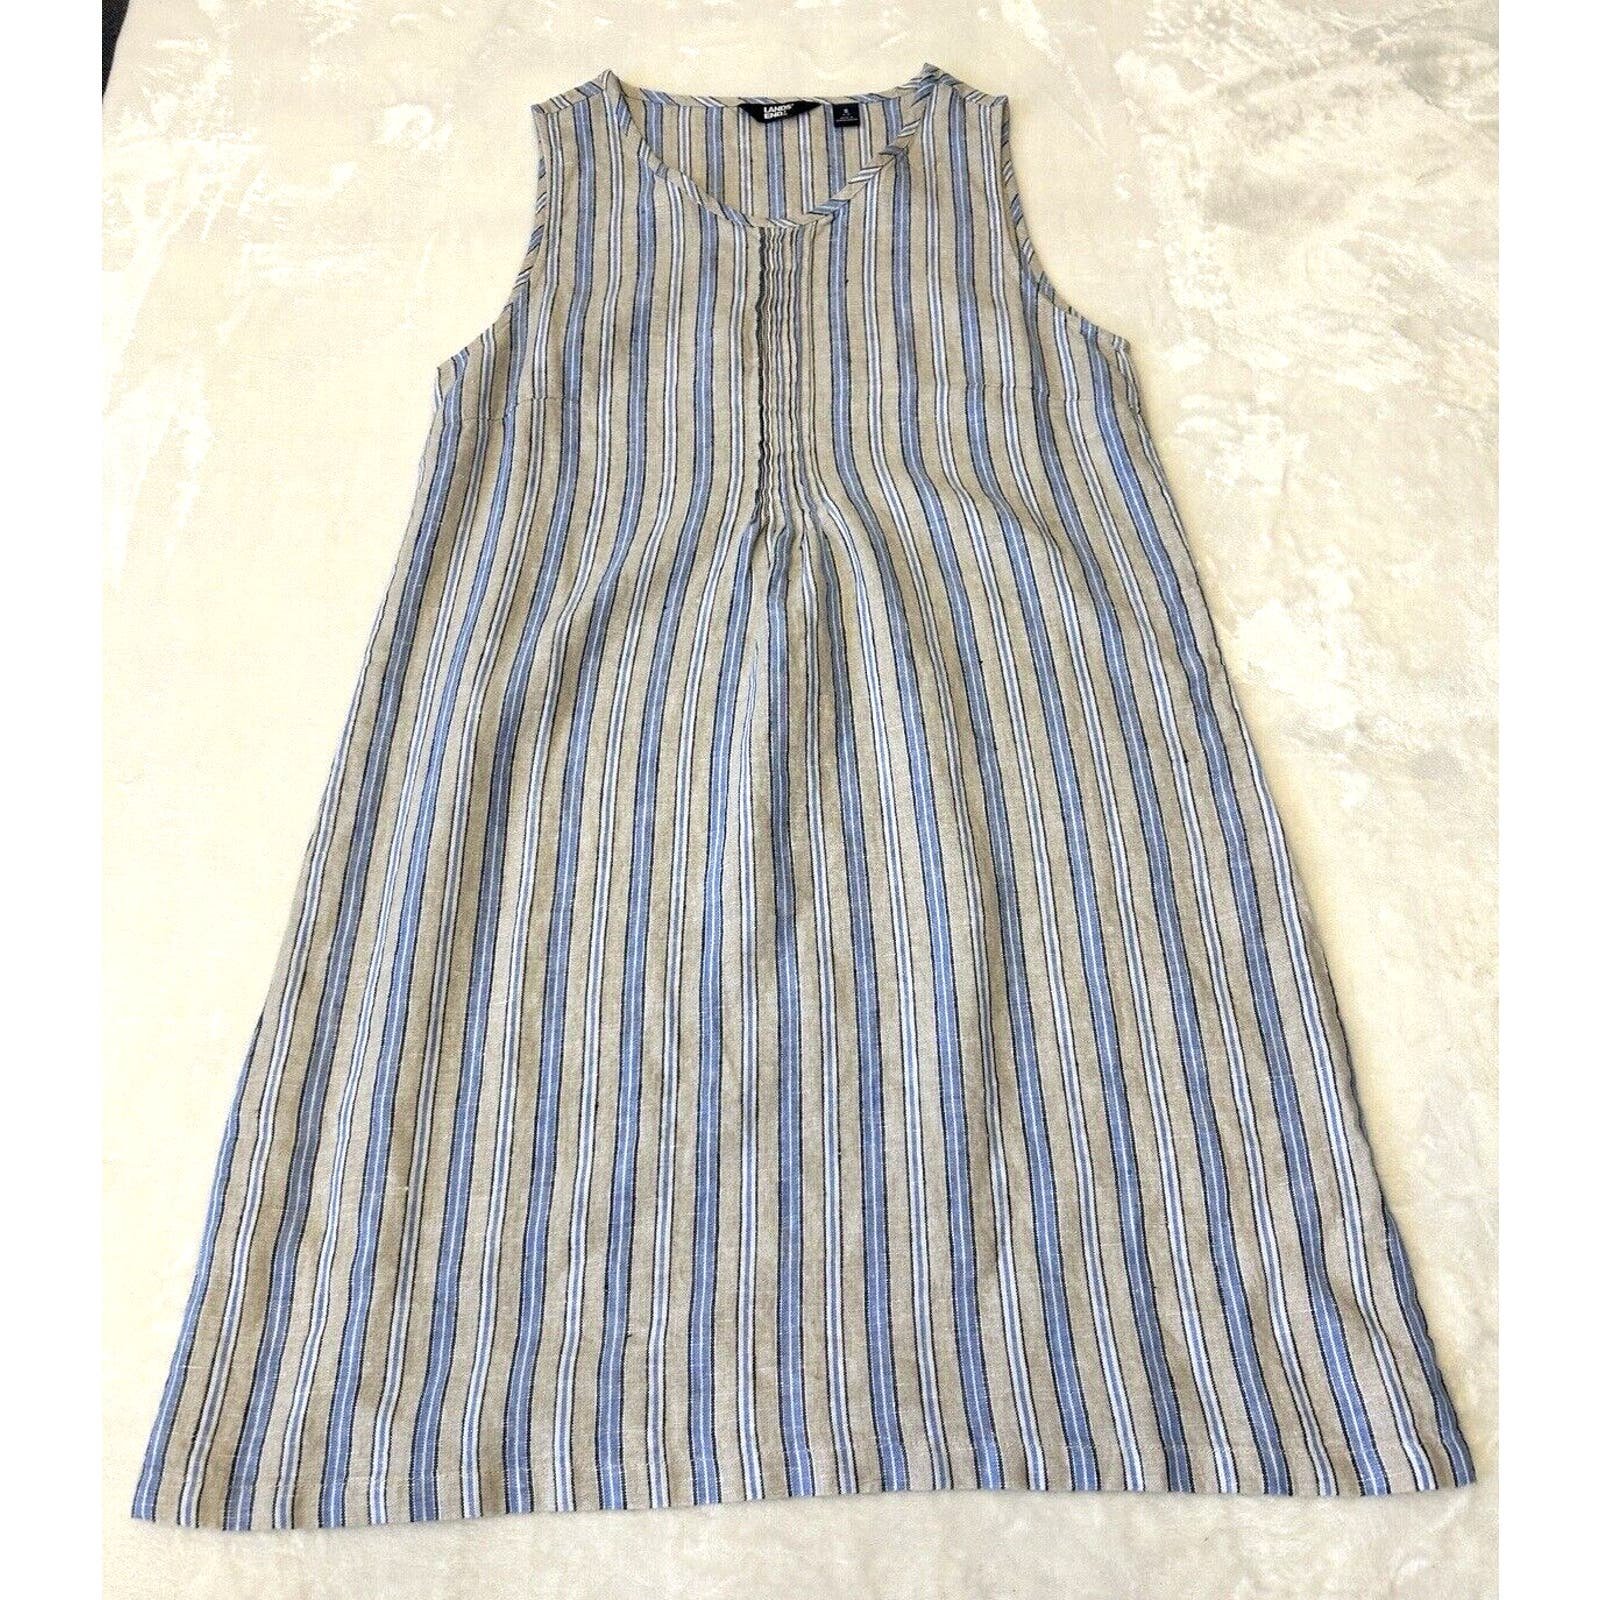 the Lowest price Lands´ End Women´s Linen Shift Dress Size Small Blue Beige Striped Lagenlook nSeqc7d8X Fashion